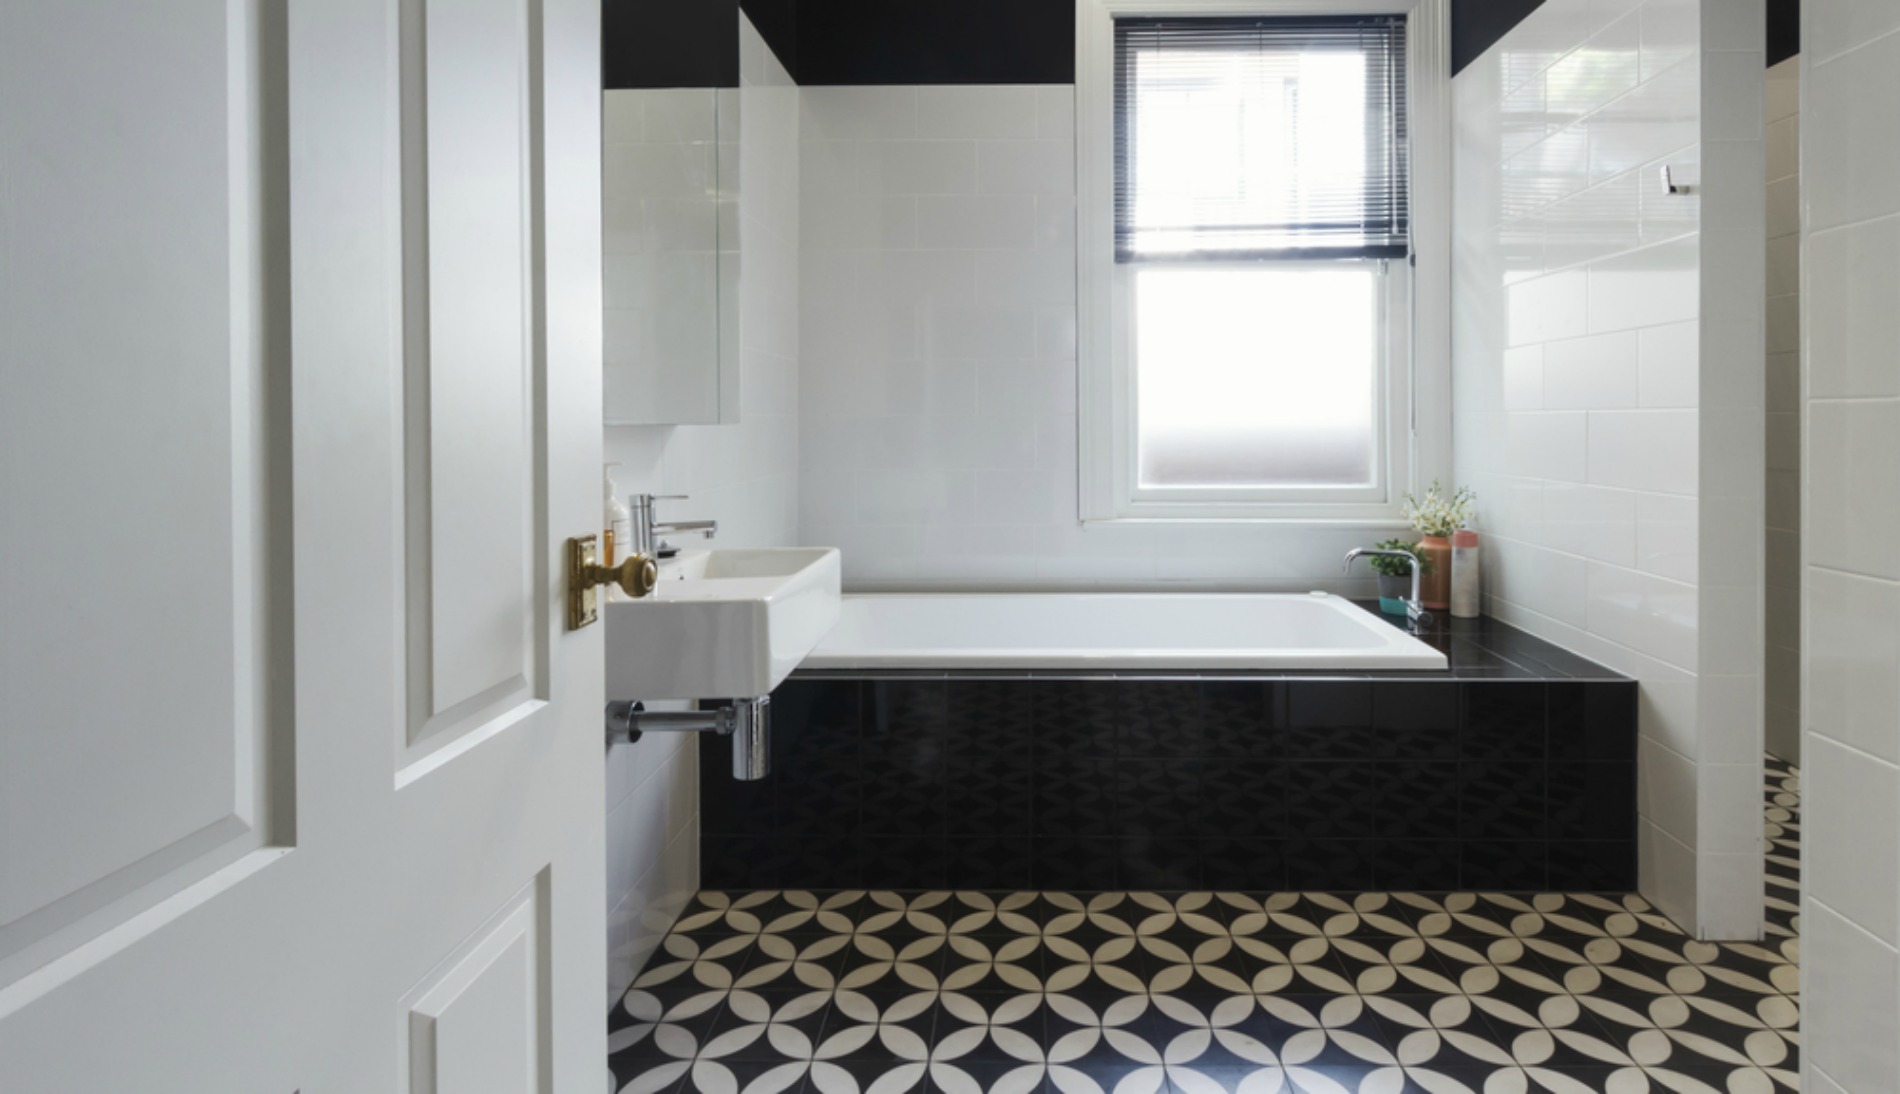 Bathrooms With Black And White Patterned Floor Tiles